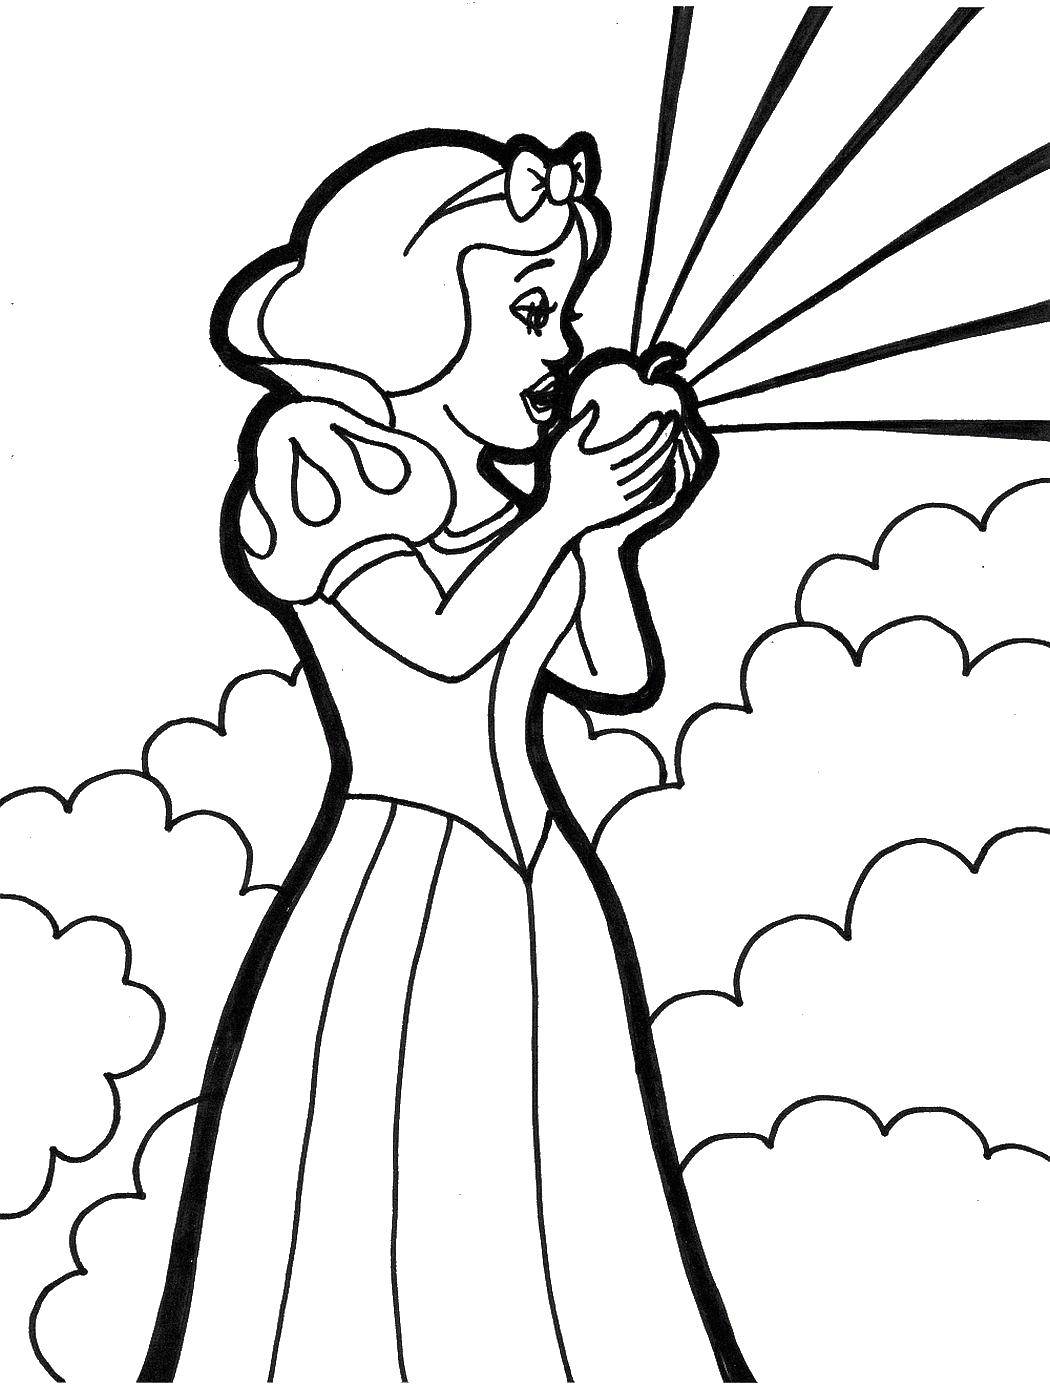 Coloring Snow white biting the Apple. Category Disney coloring pages. Tags:  , Disney characters, princesses, Snow white.